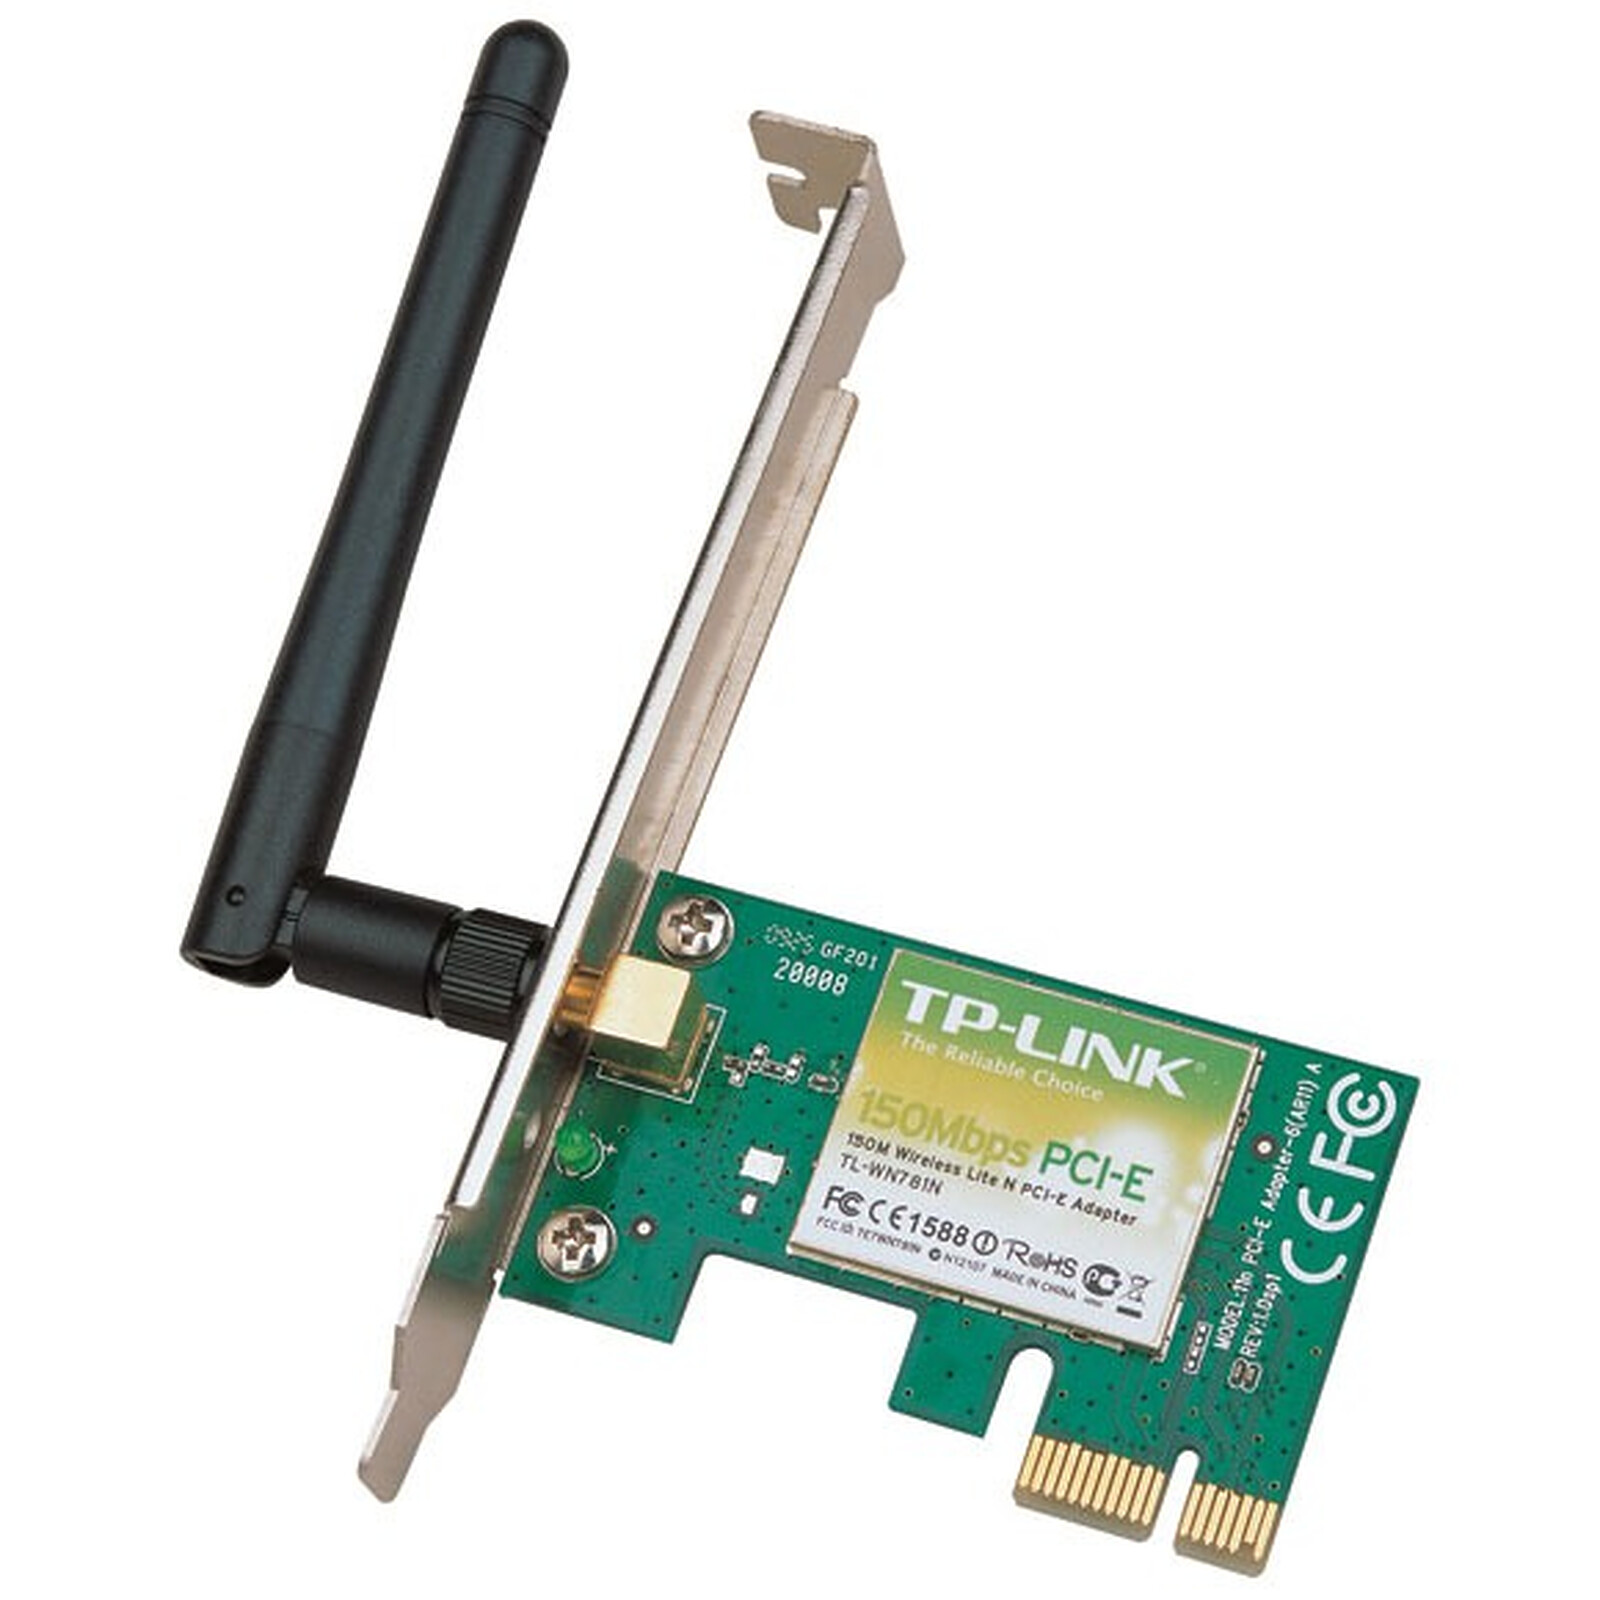 tl wn881nd connect to which pci-e x16